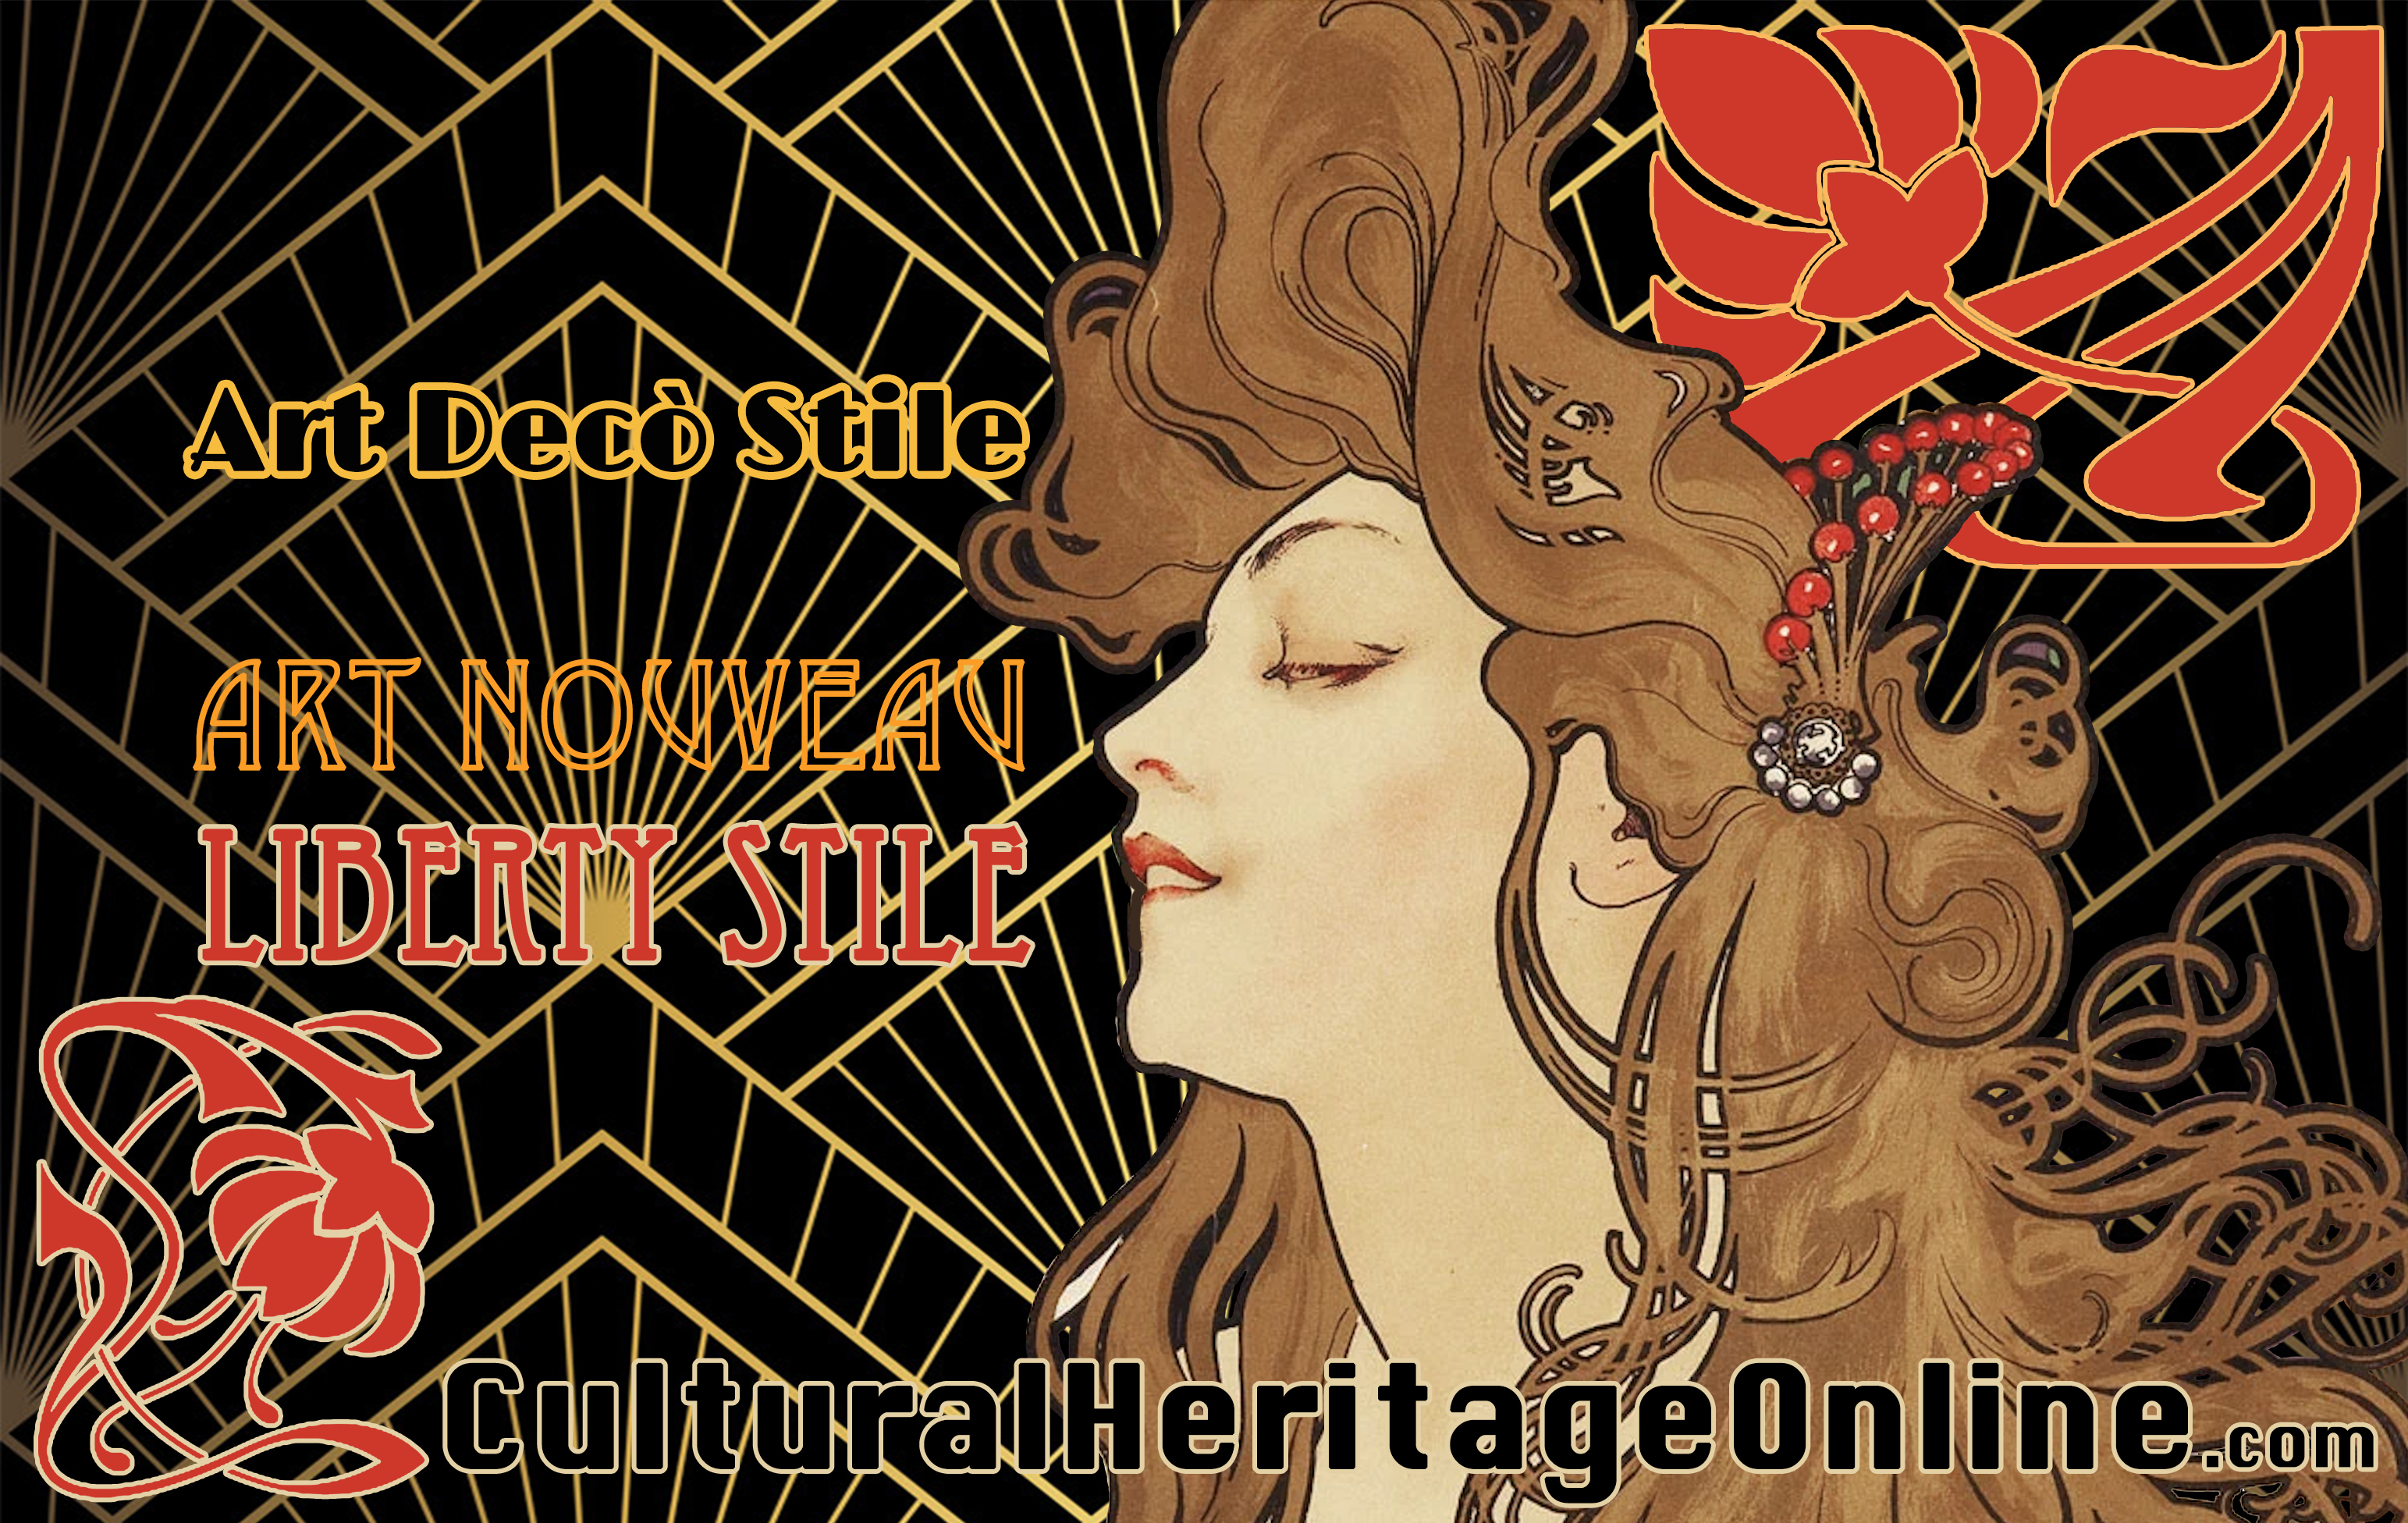 What are the differences and characteristics between the Art Decò, Art Nouveau and Italian Liberty styles of the early 1900s